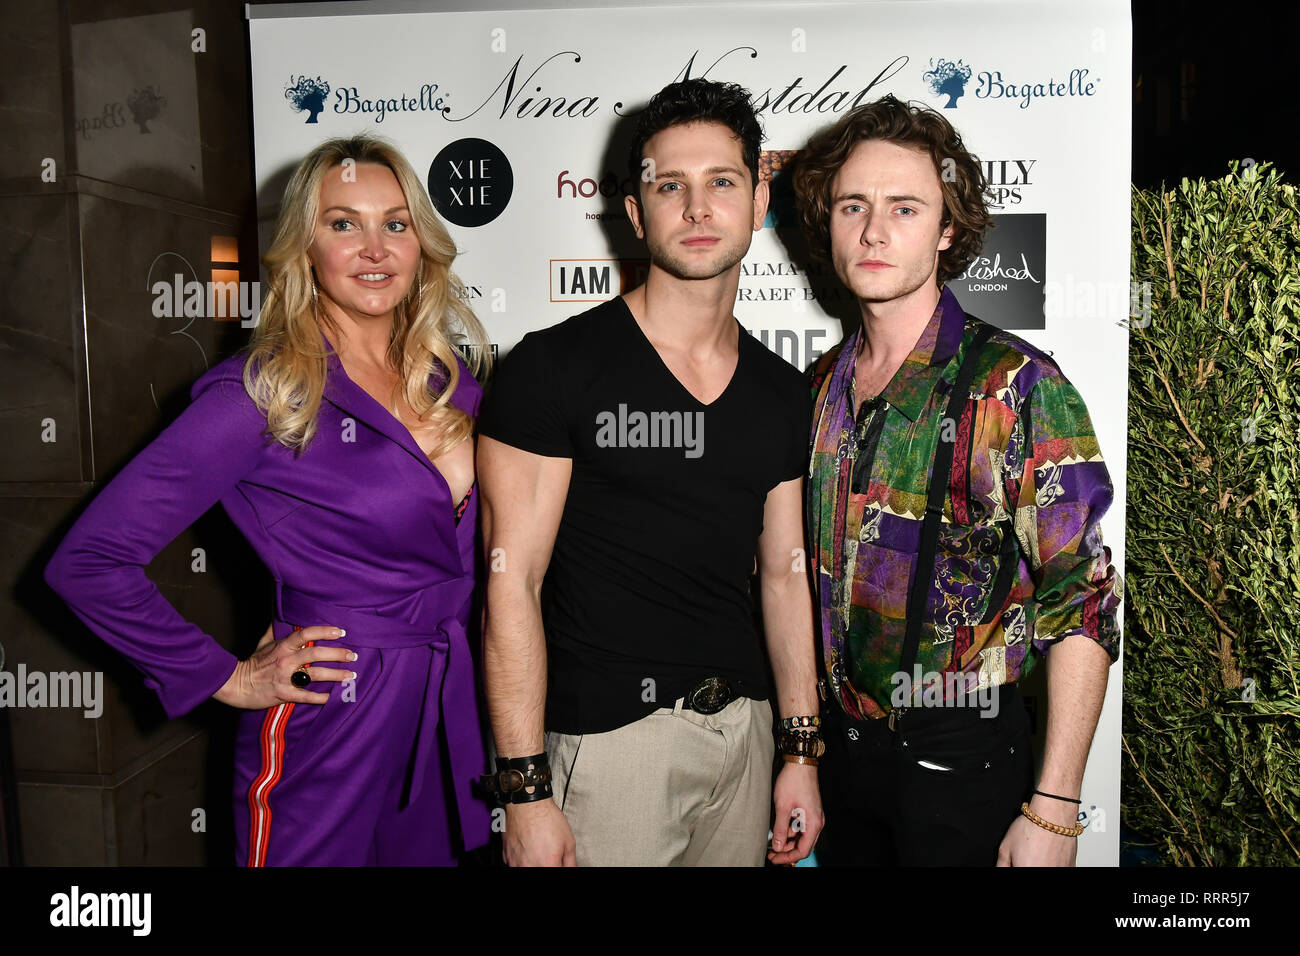 London, UK. 26th Feb 2019. Heather Bird tchenguiz, Oliver smiles and Ben Luke Jones Arrivers at Nina Naustdal catwalk show SS19/20 collection by The London School of Beauty & Make-up at Bagatelle on 26 Feb 2019, London, UK. Credit: Picture Capital/Alamy Live News Stock Photo